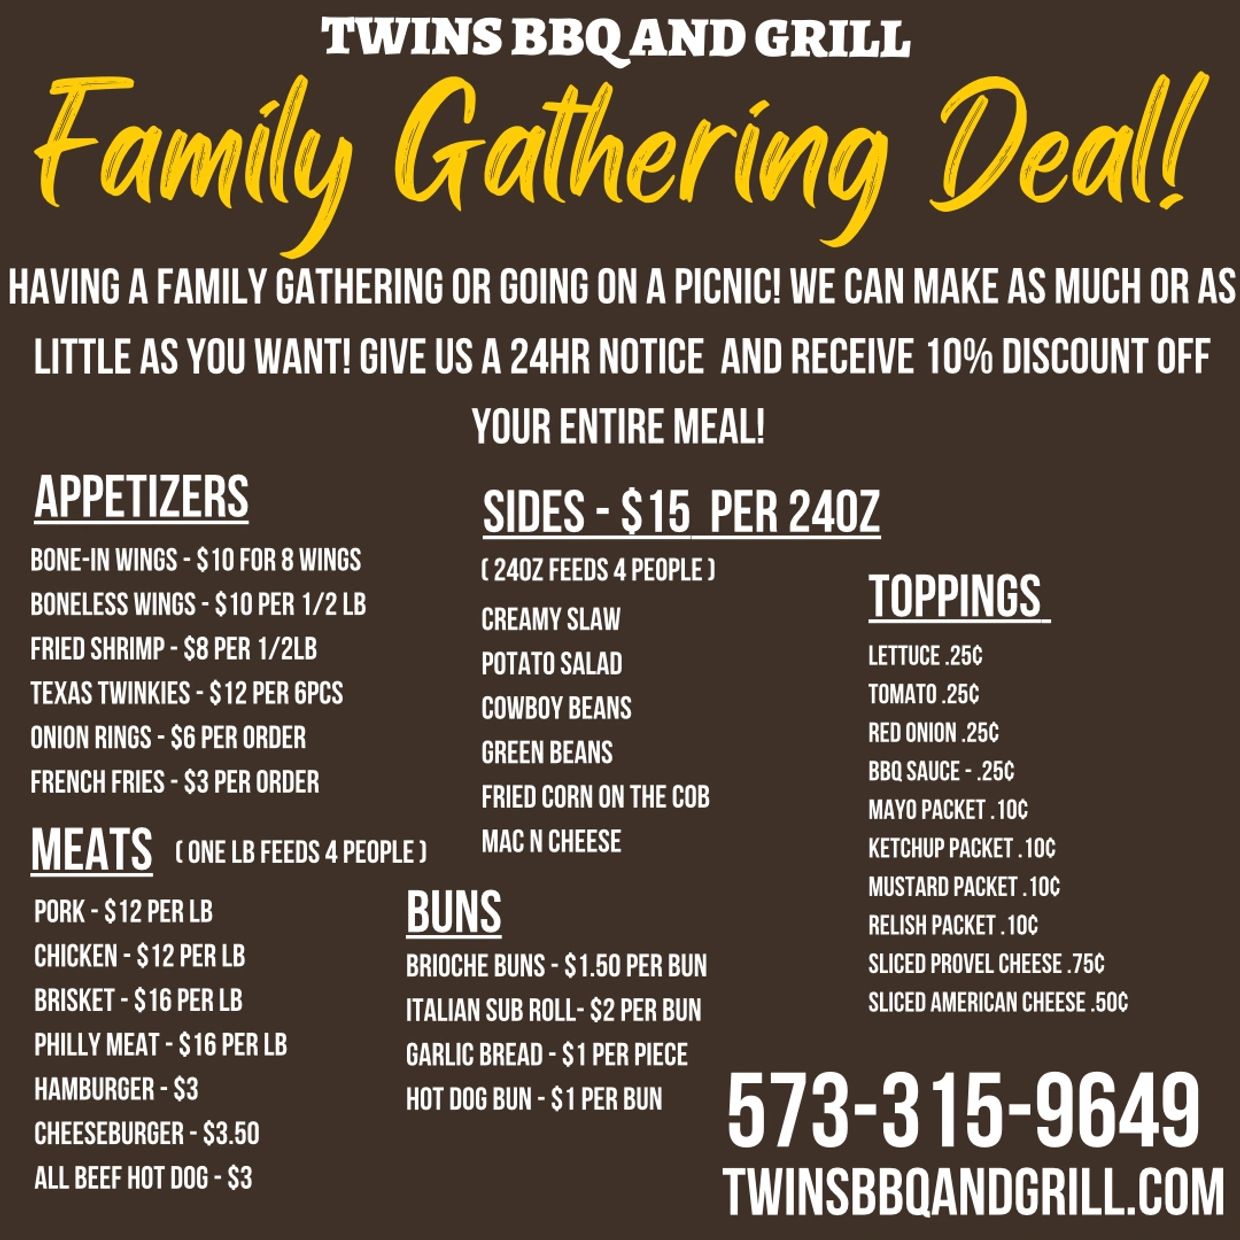 Family Meal Deals at Twins BBQAnd Grill in Farmington, MO 63640